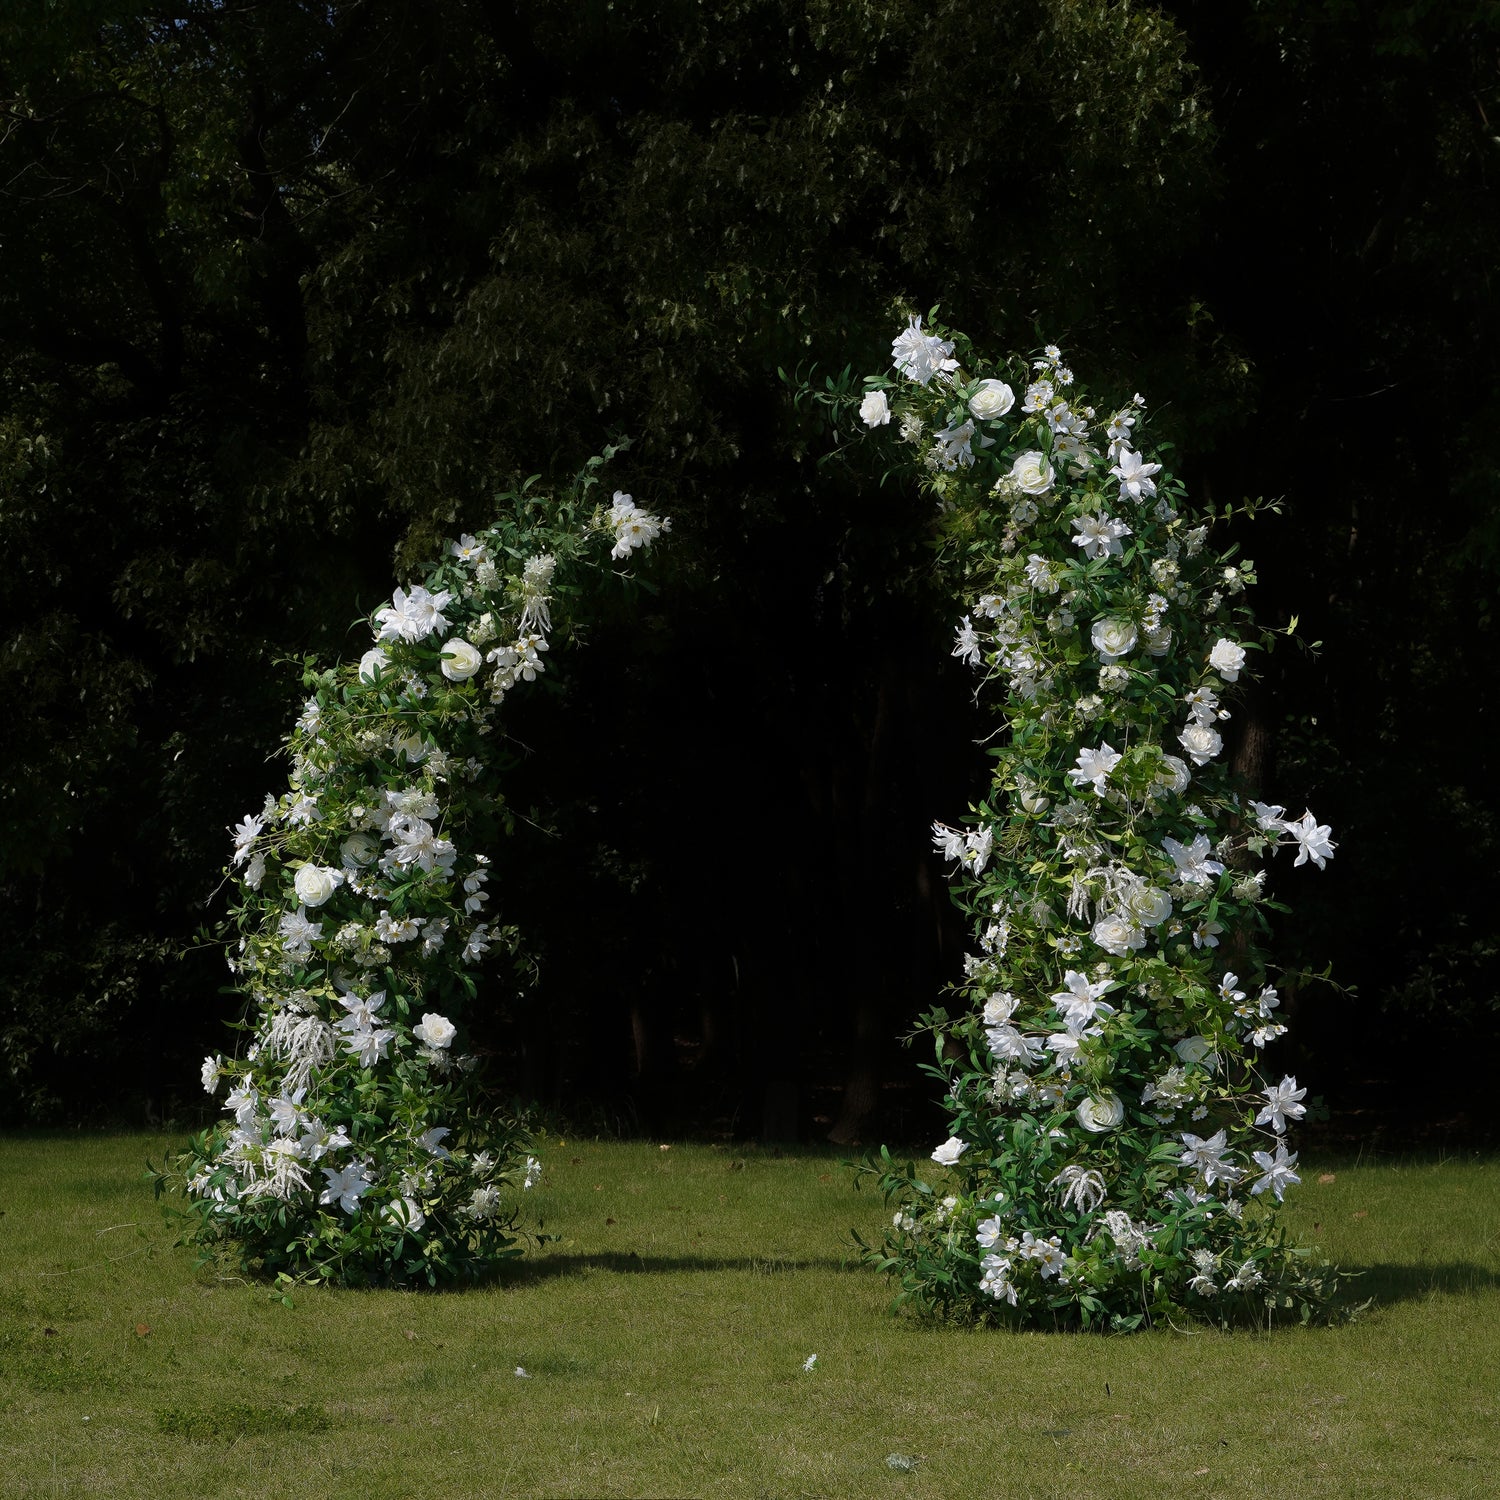 Made of artificial flowers, this flower arch is suitable for weddings, parties, birthdays and other events. The flower arch is made of metal frame, easy to assemble and disassemble. Big enough for your guests to take pictures and keep. Flower arches are made of high quality material and durable. The color of the floral arch can be chosen according to your wedding theme. A floral arch is the perfect decoration for any occasion and is sure to impress your guests.